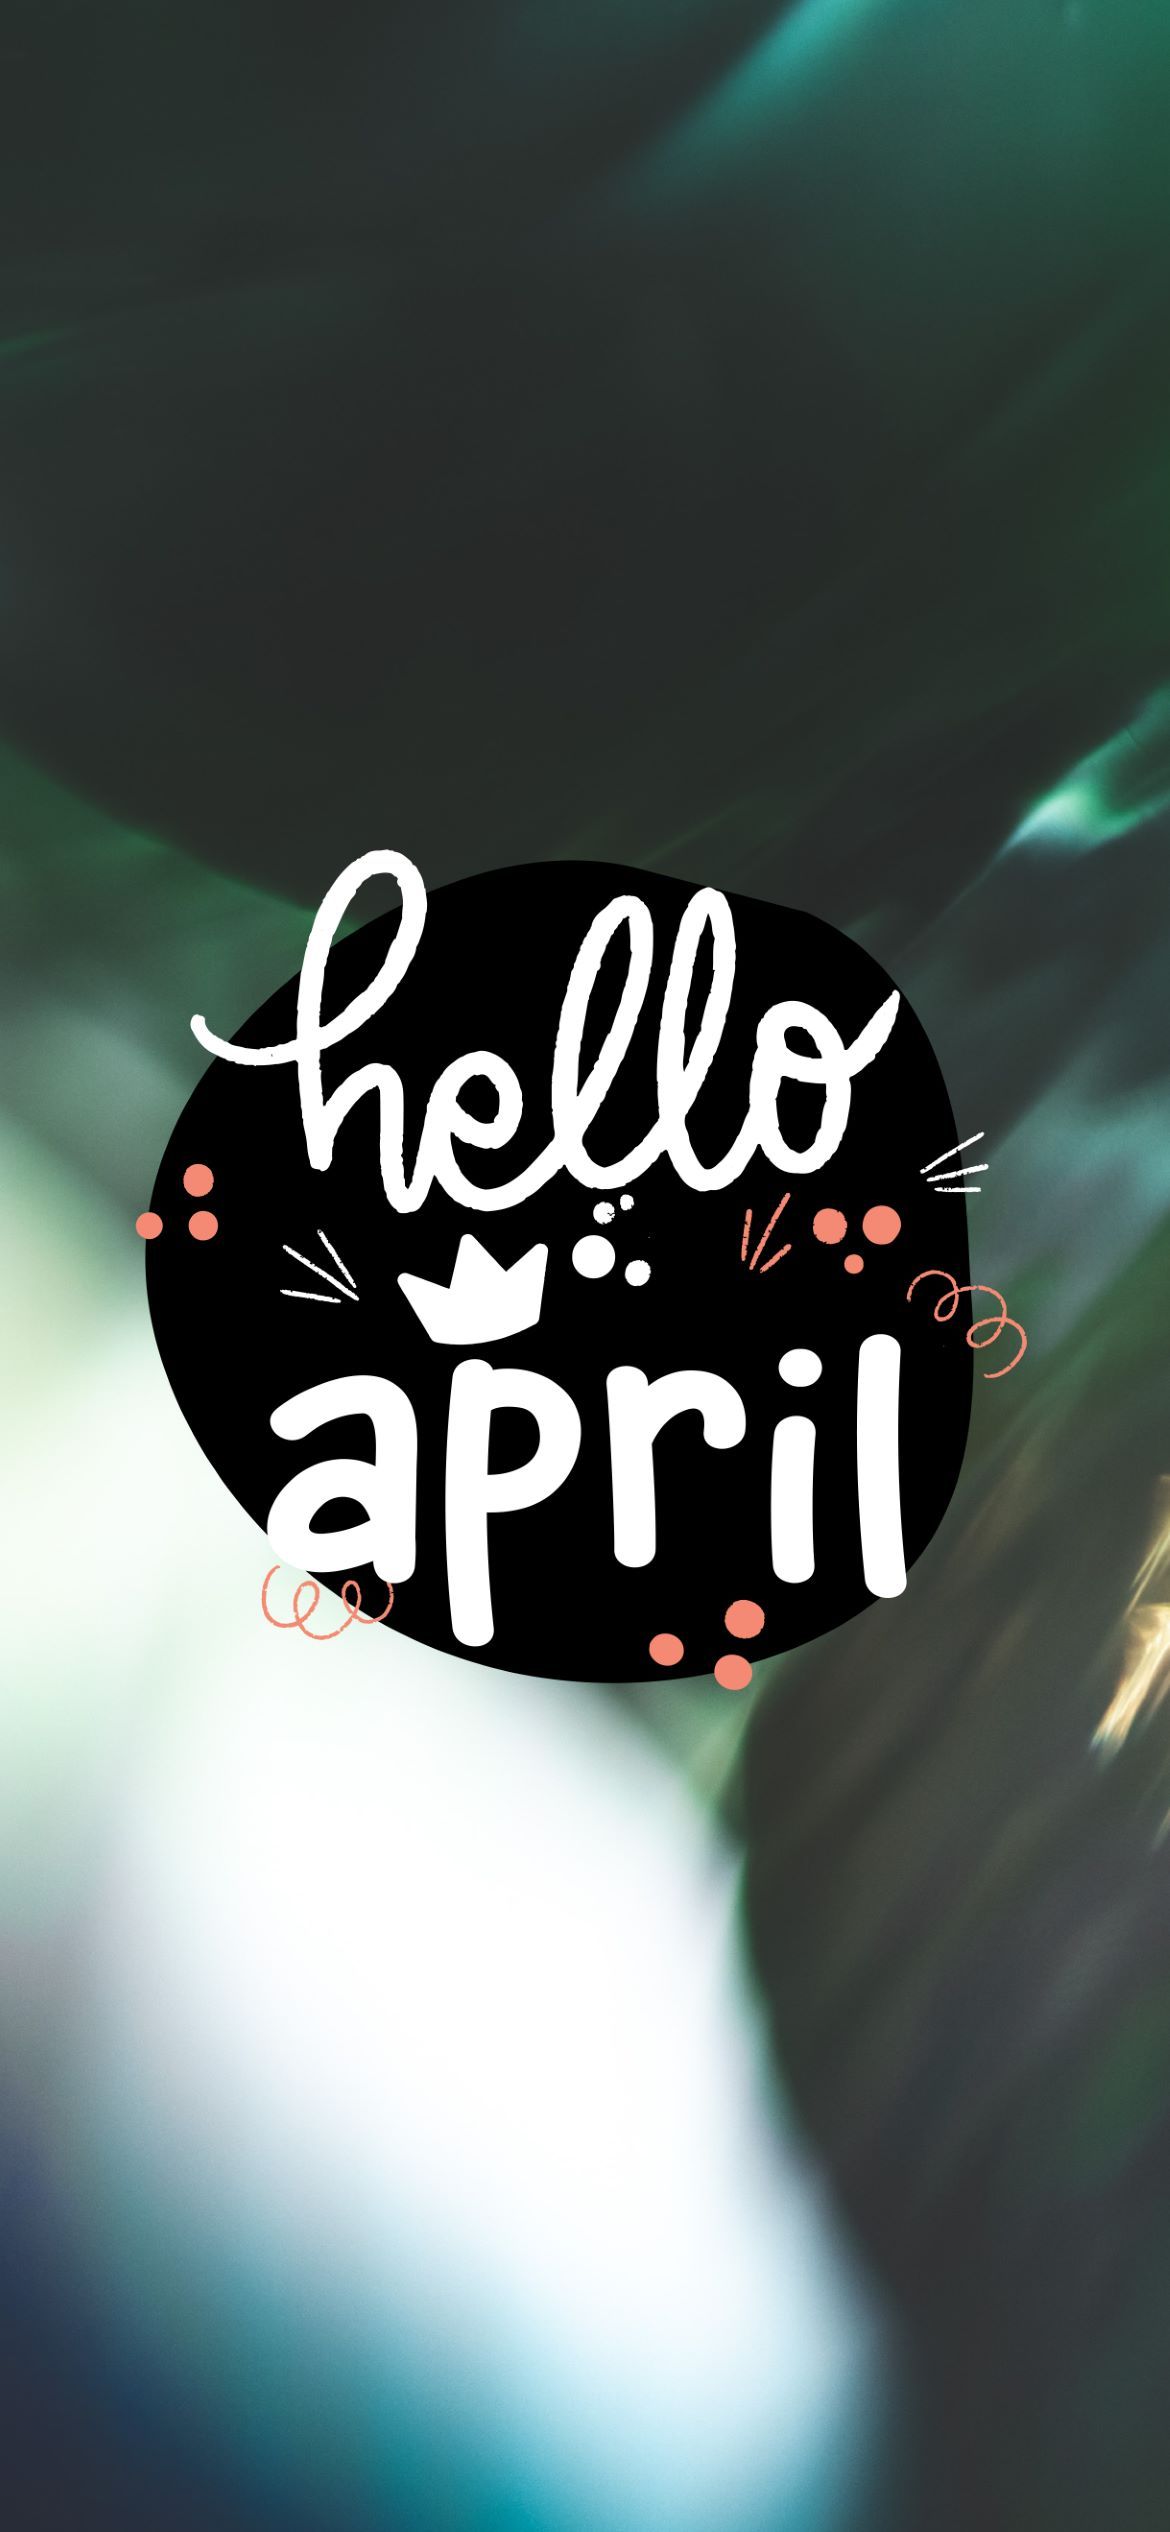 A black and white image with the words hello april - April